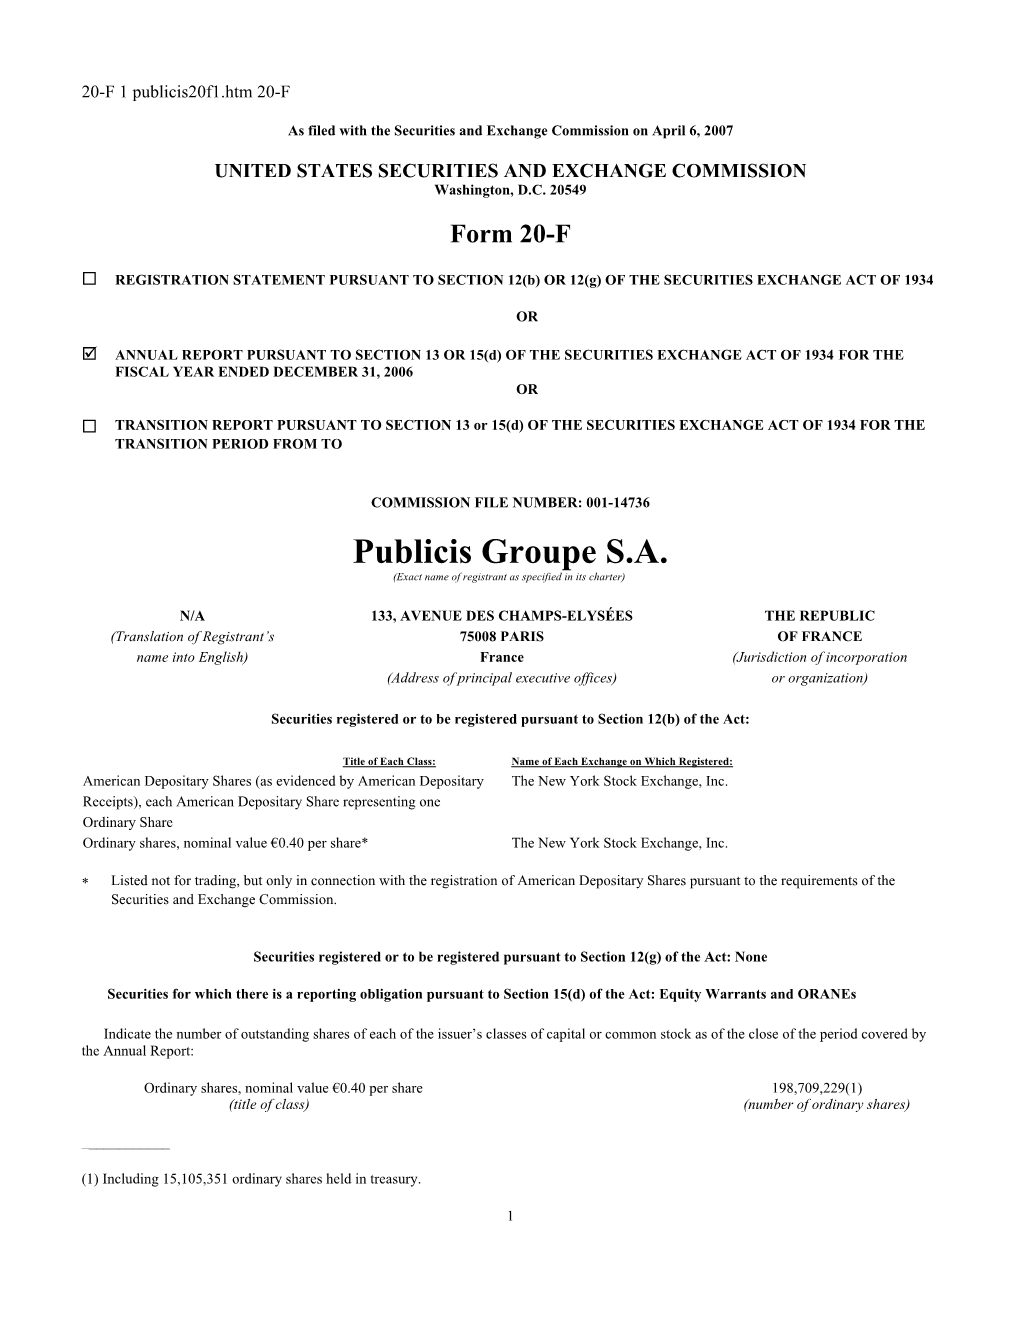 Publicis Groupe S.A. (Exact Name of Registrant As Specified in Its Charter)